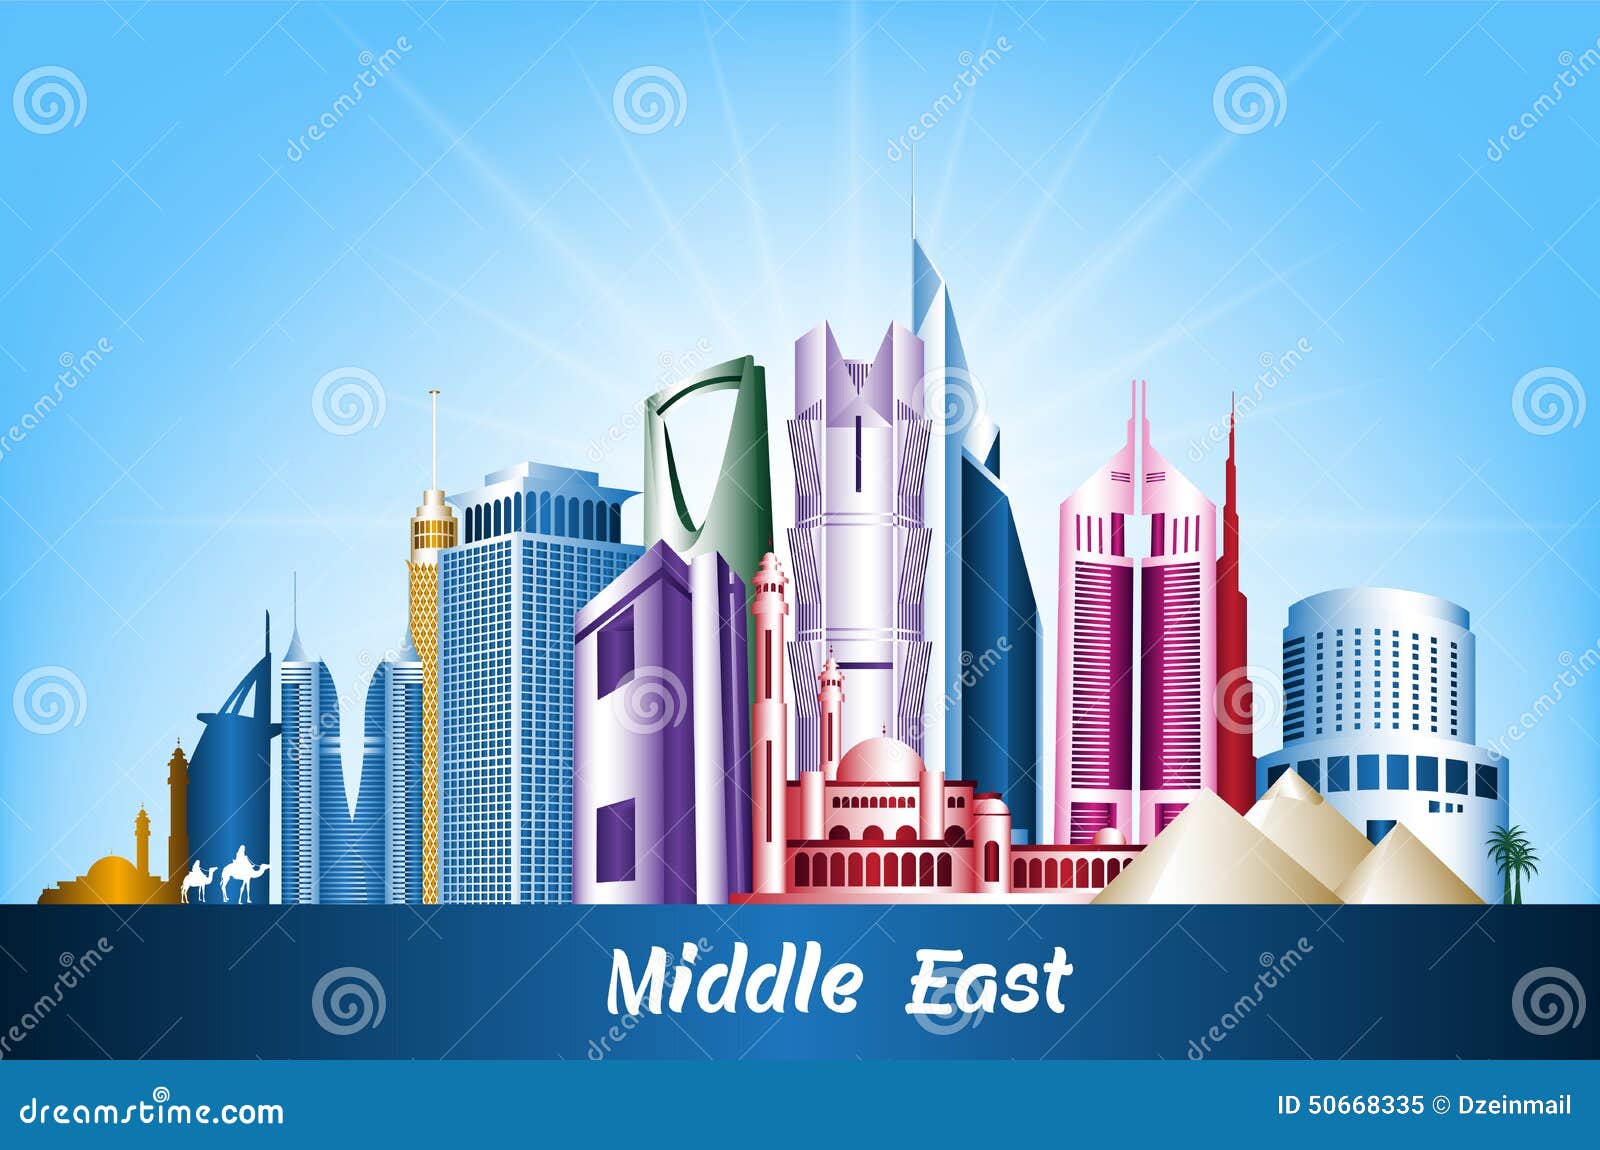 cities and famous buildings in middle east